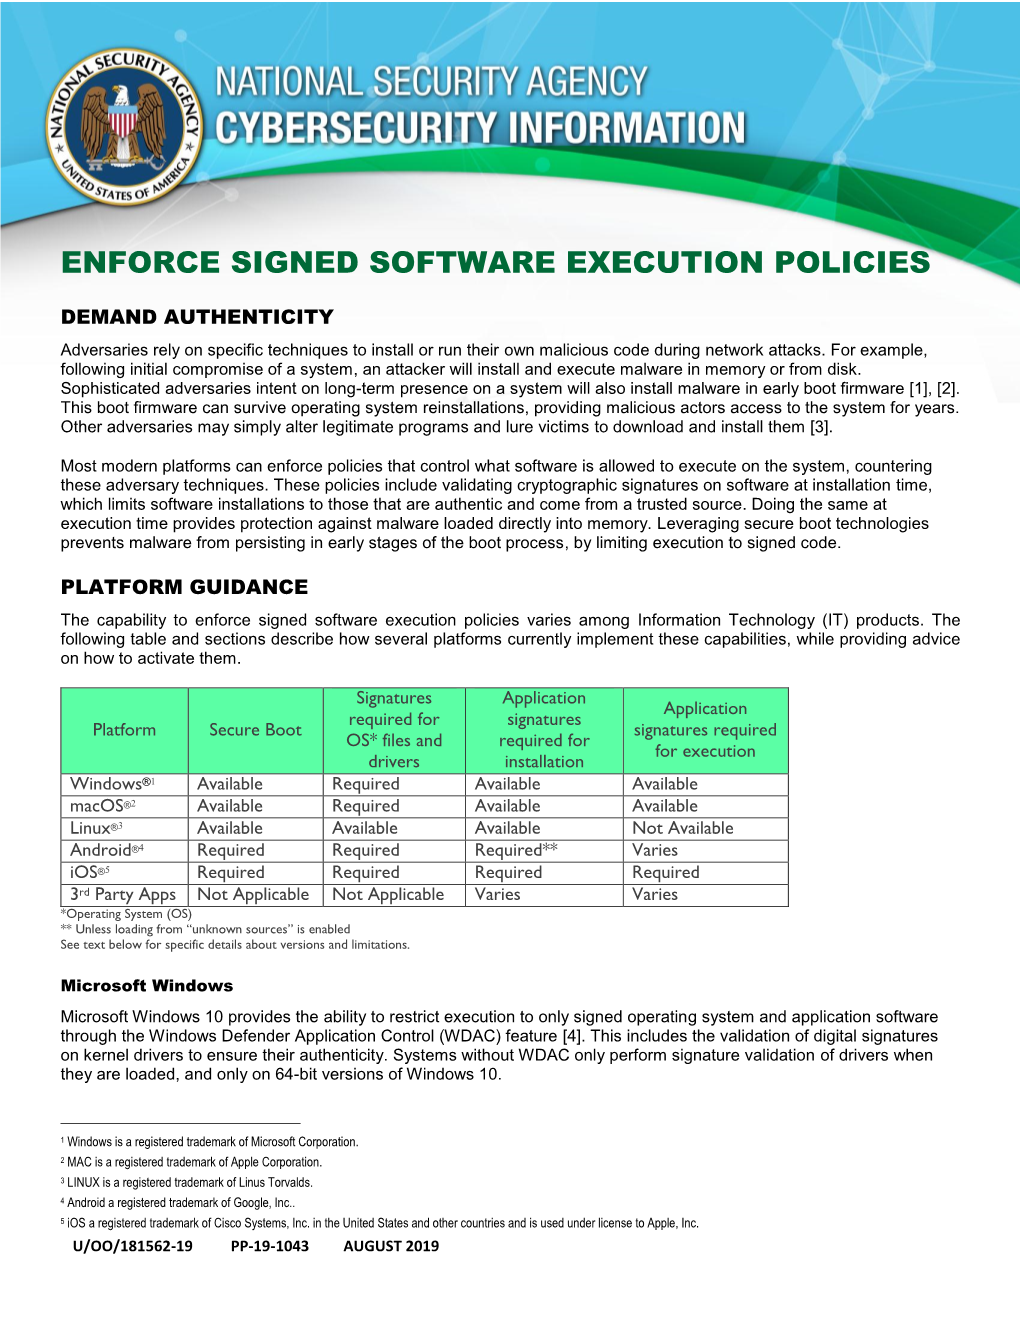 Enforce Signed Software Execution Policies